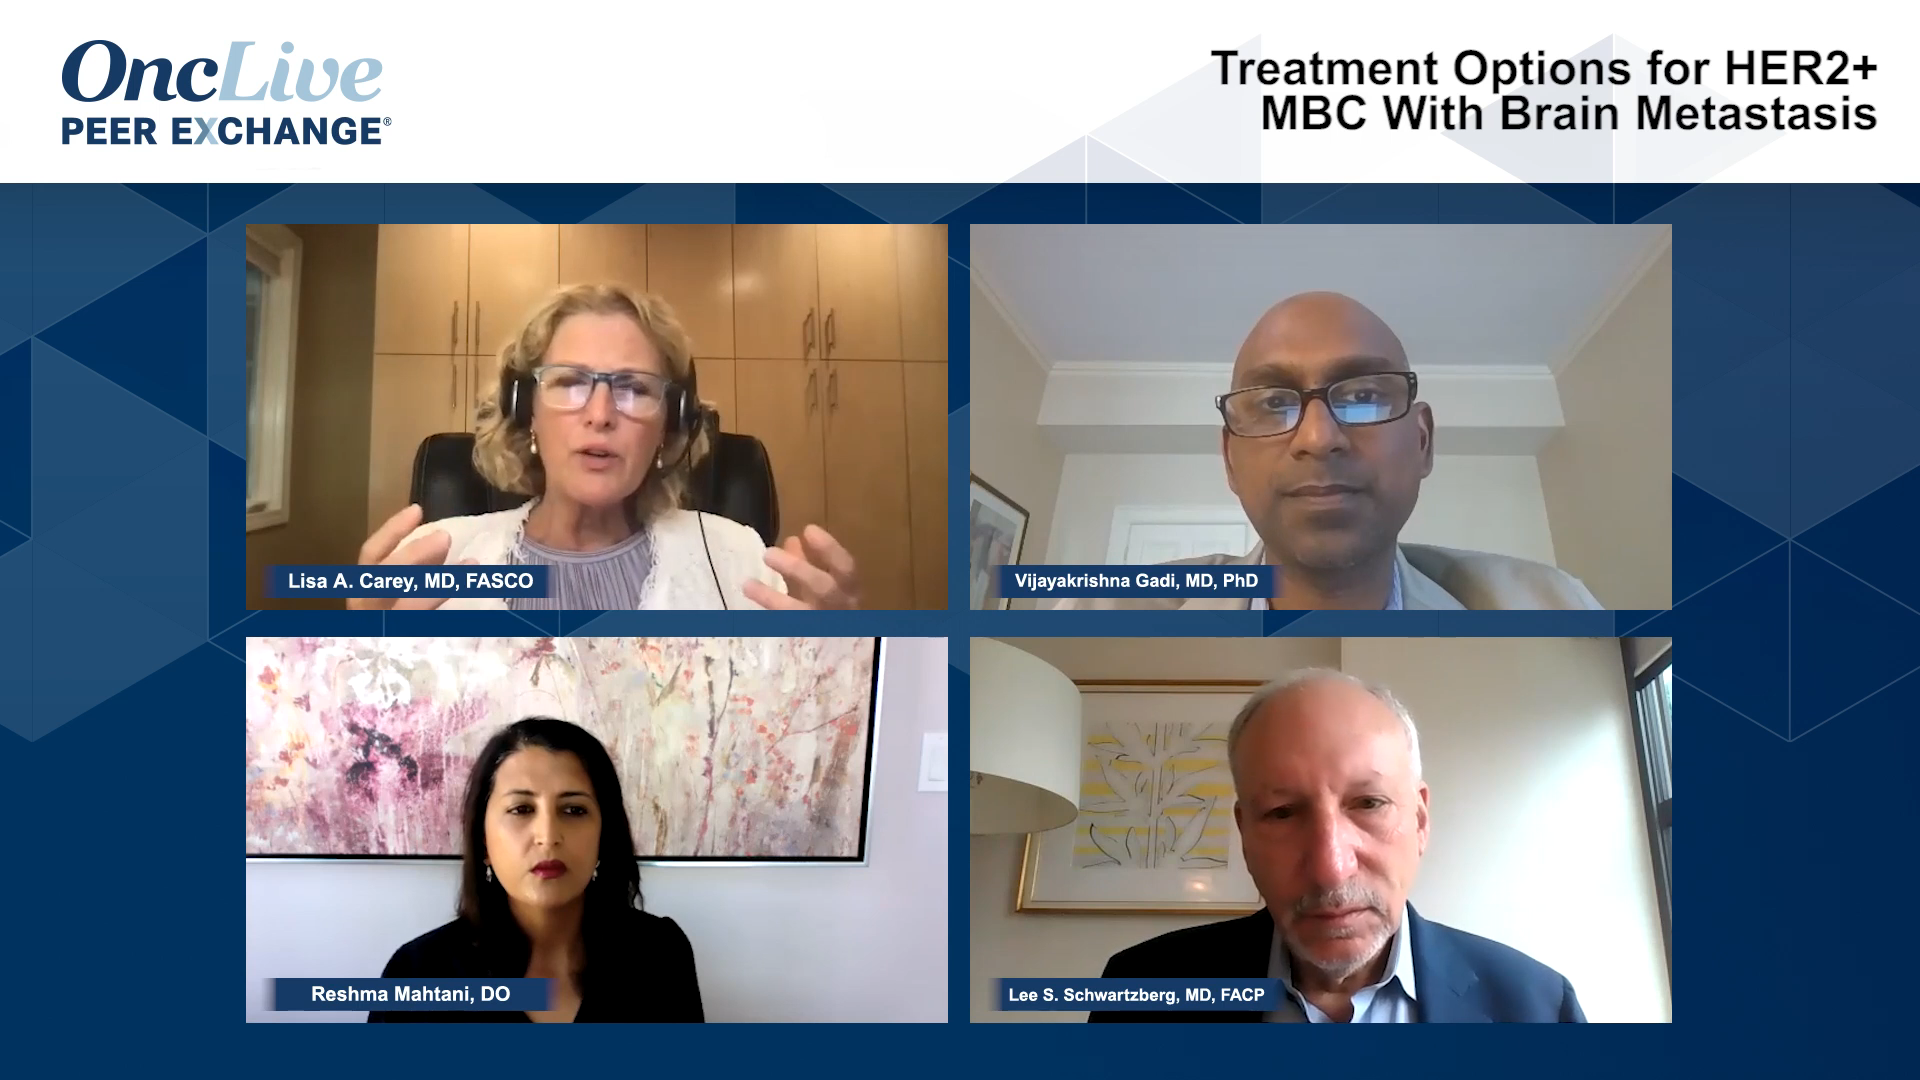 Treatment Options for HER2+ MBC With Brain Metastasis